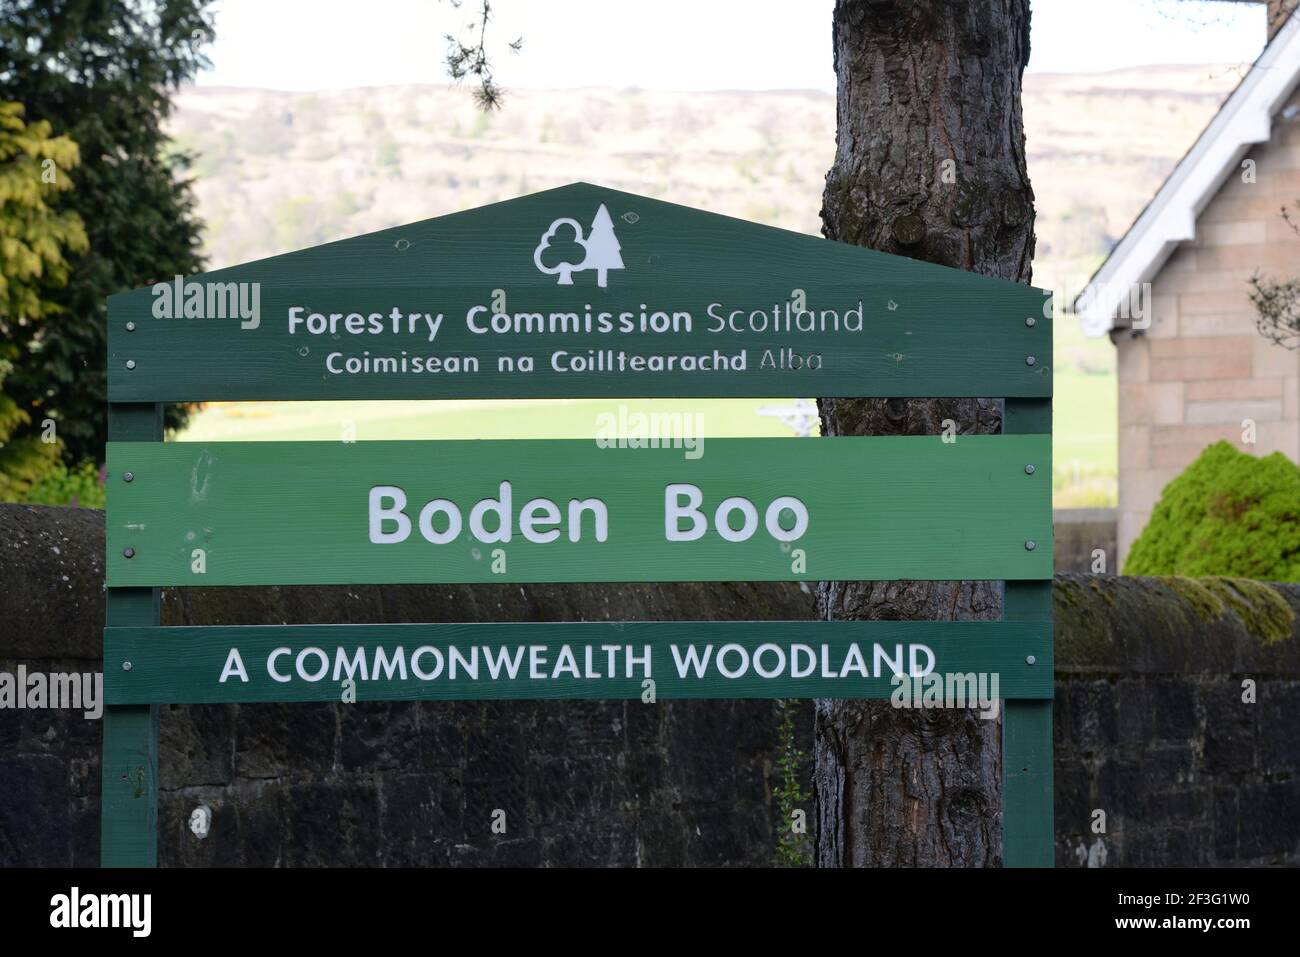 Forestry Commission sign/information board for Boden Boo Commonwealth Woodland in Erskine, Scotland, UK Stock Photo